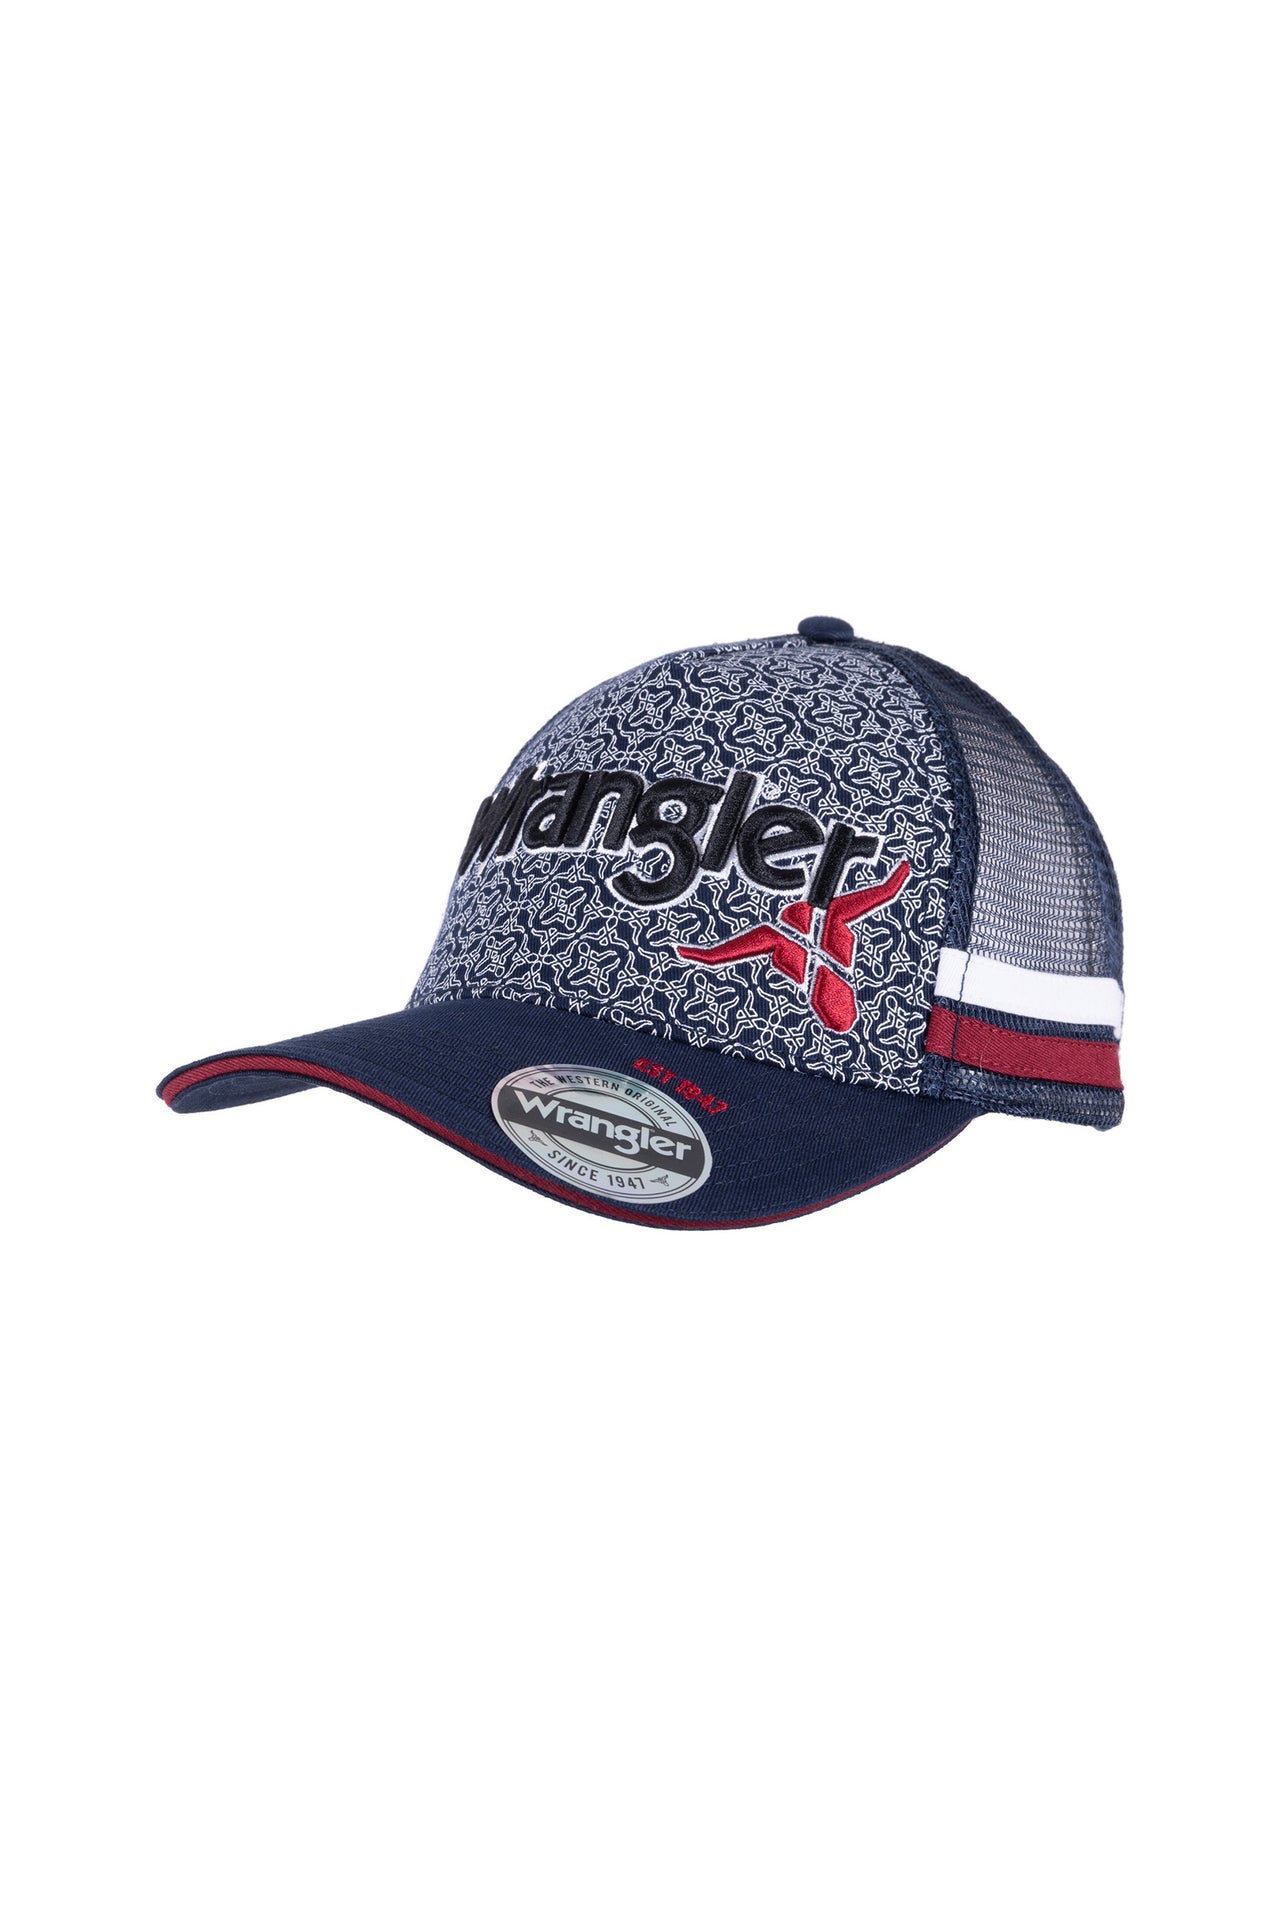 Macquarie Trucker Cap - The Trading Stables